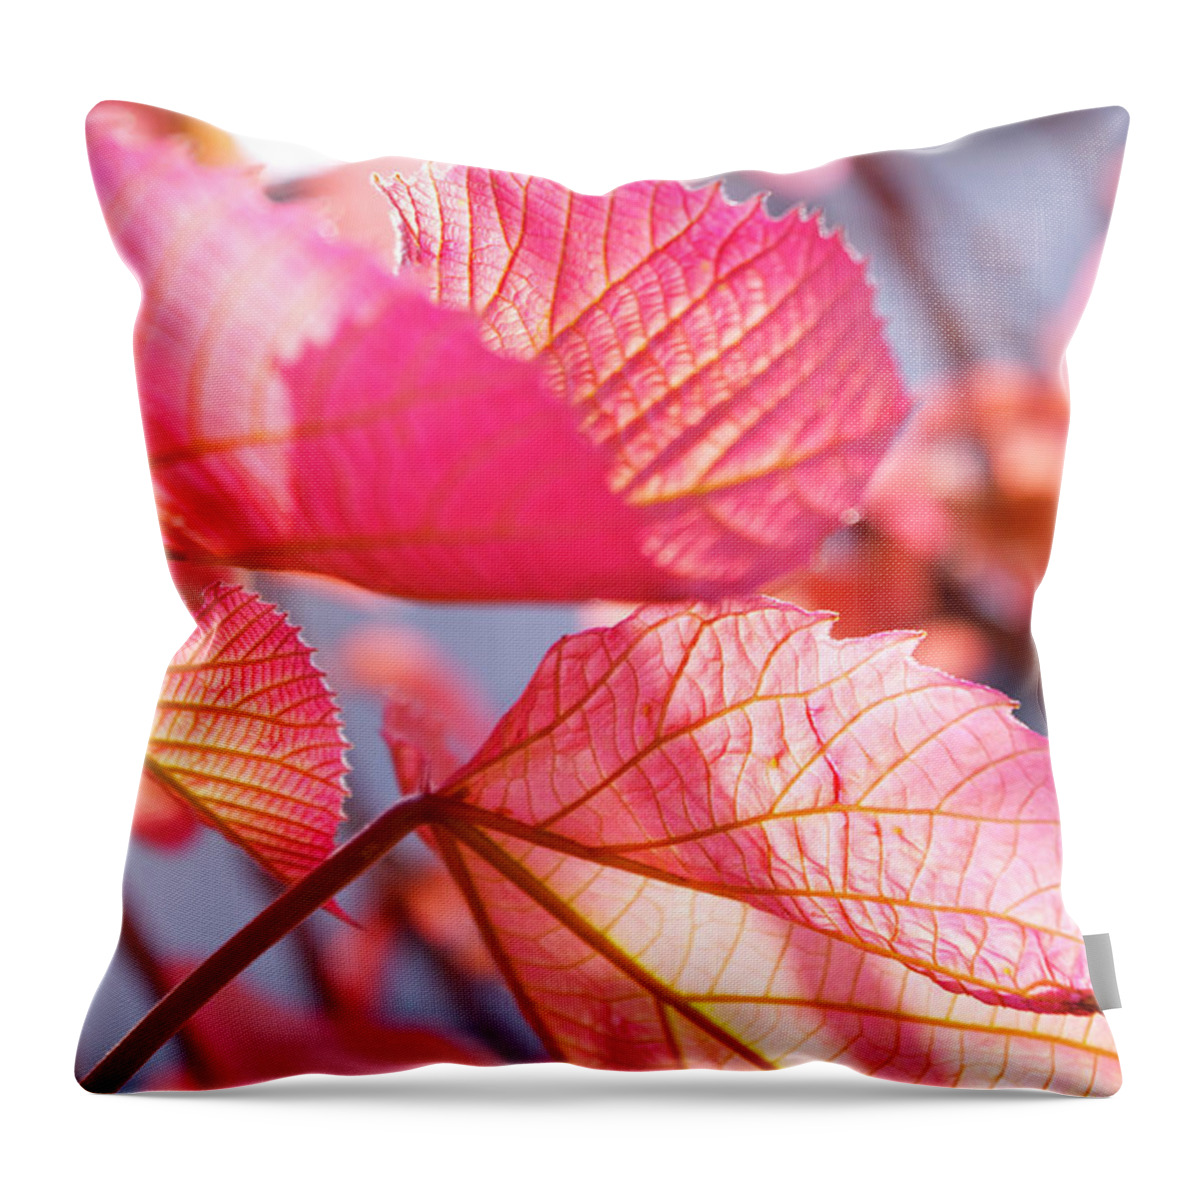 Outdoors Throw Pillow featuring the photograph Vein by Photograph Shino Ono (lechat8)